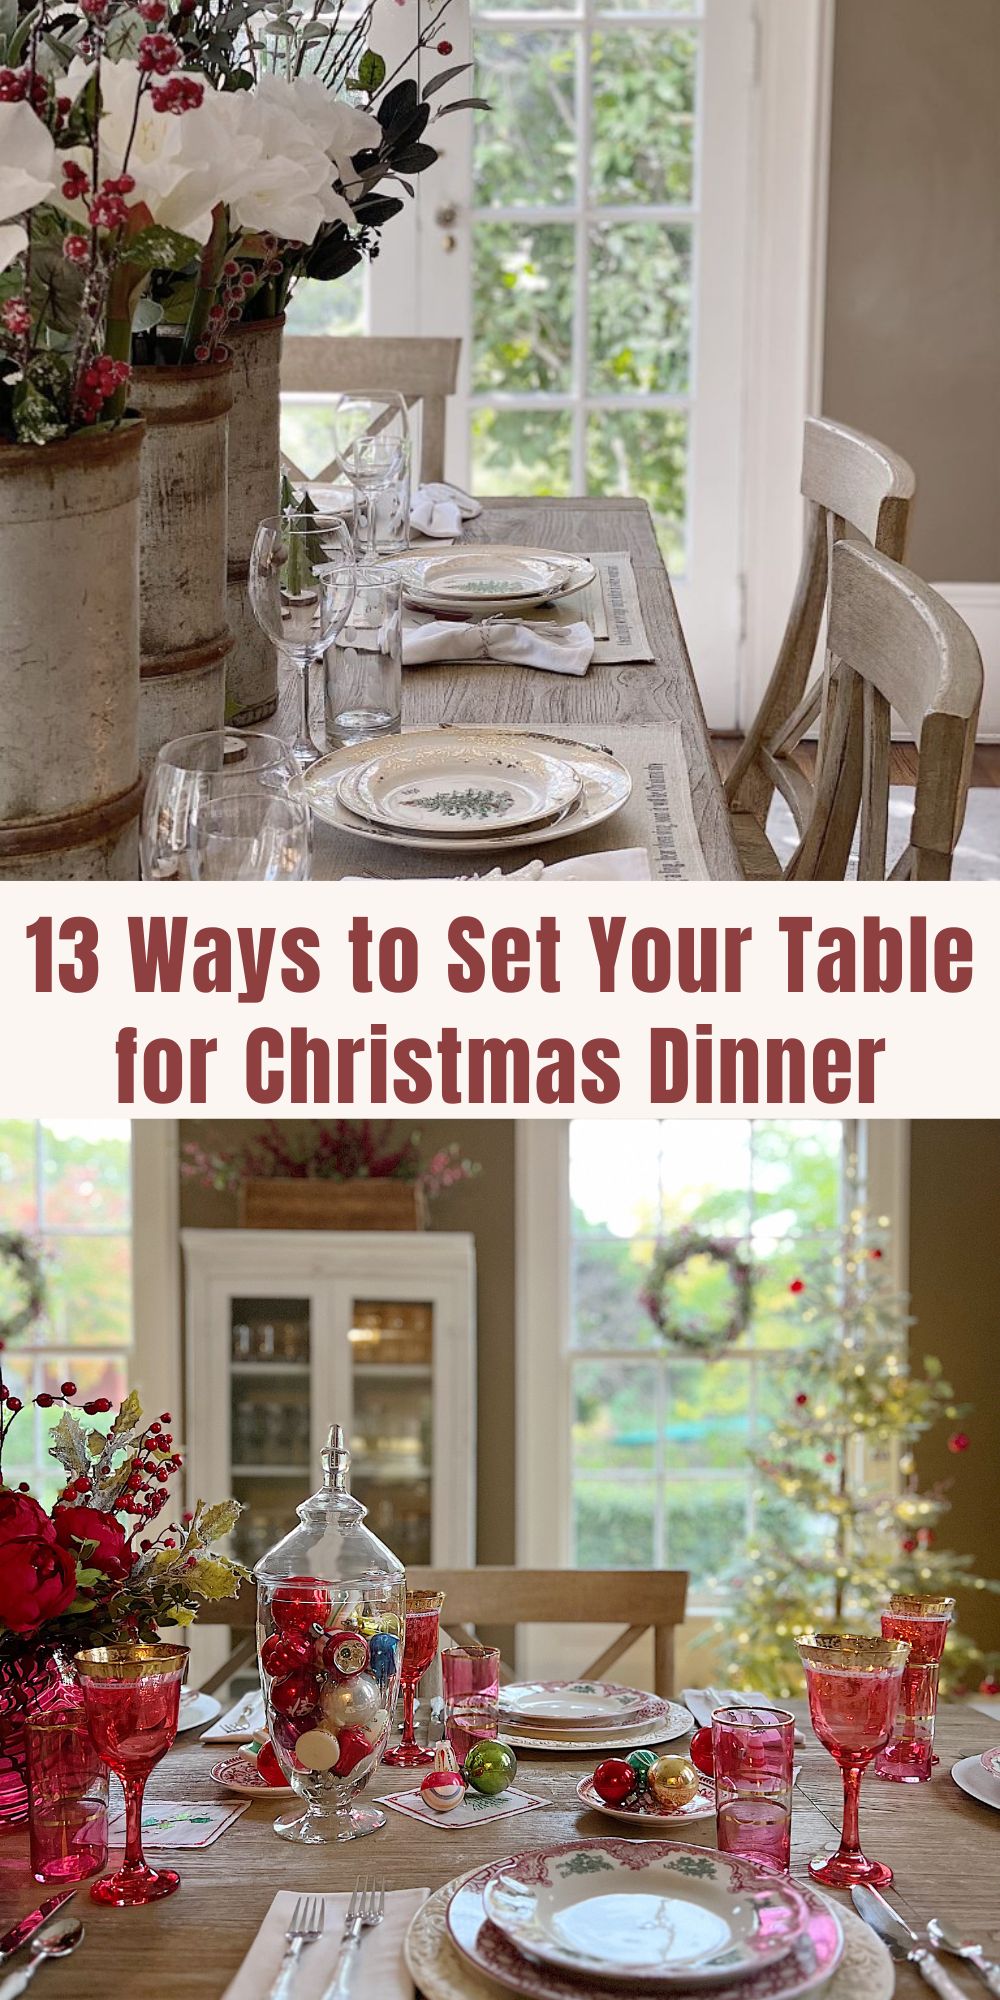 Today I am sharing 13 ways to set your table for Christmas dinner. I hope these ideas inspire you to have fun setting your table!